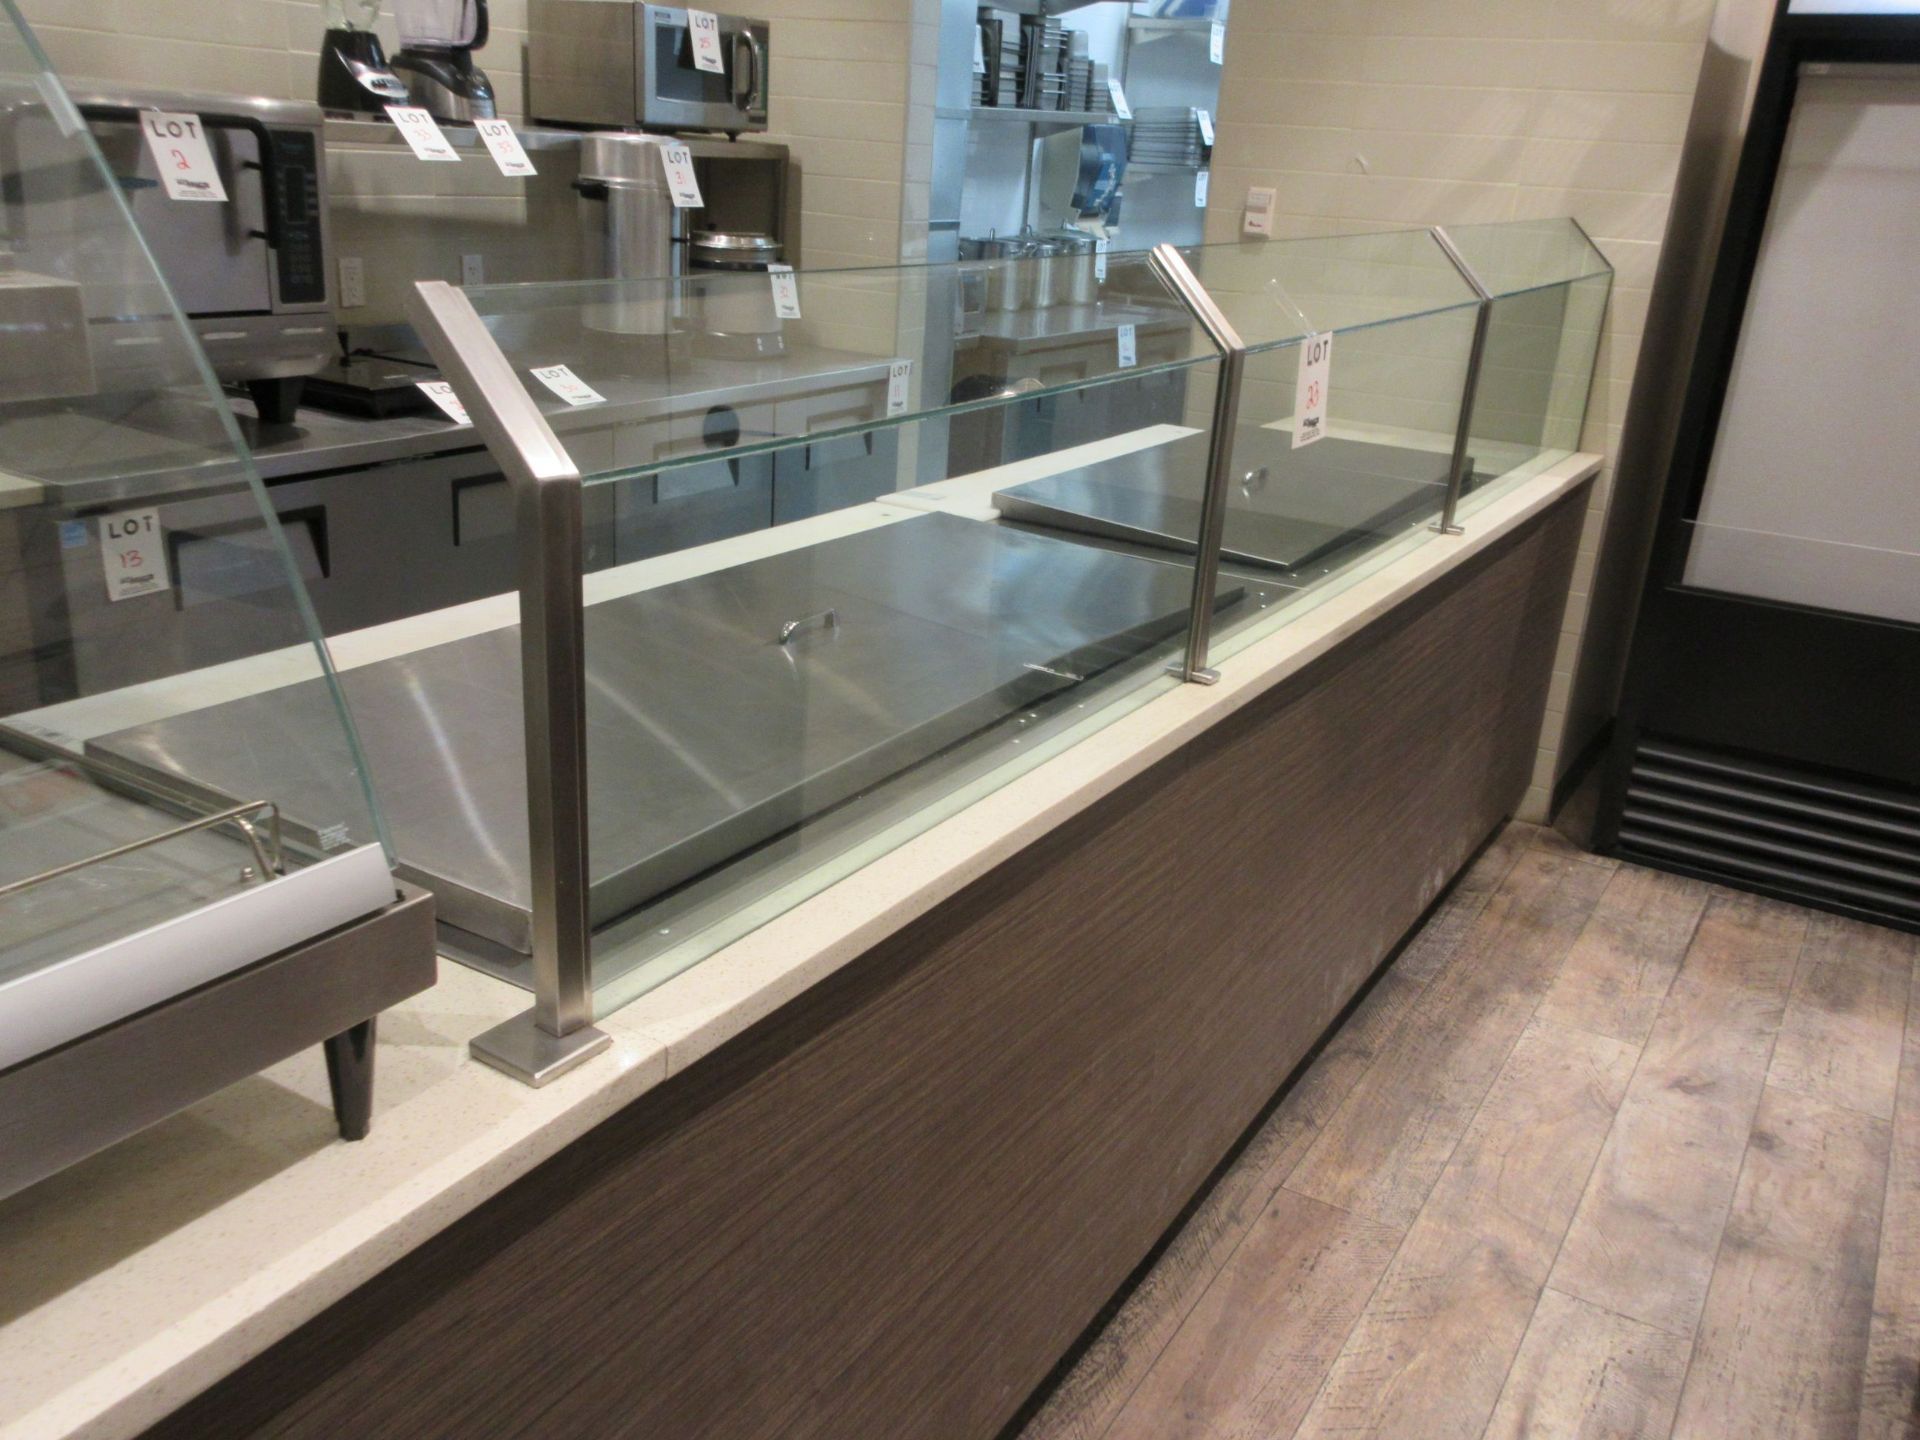 Counter c/w quartz countertop and glass display, 23 ft w x 29"d x 36"h - Image 2 of 2